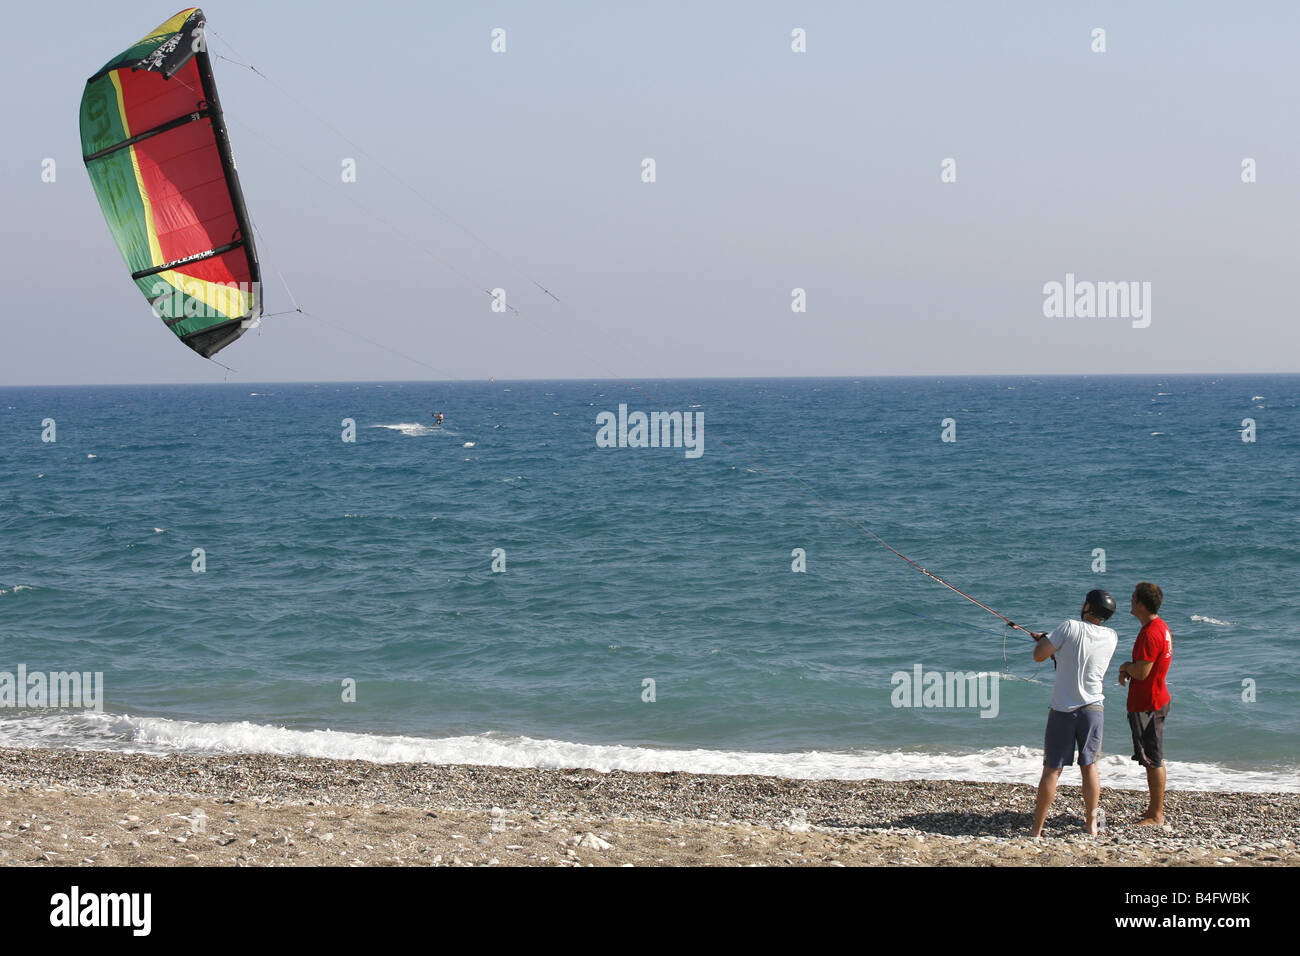 A Kite Surfing instructor conducts kite surfing lessons on Paramali Beach near the seaside village of Pissouri in Cyprus. Stock Photo